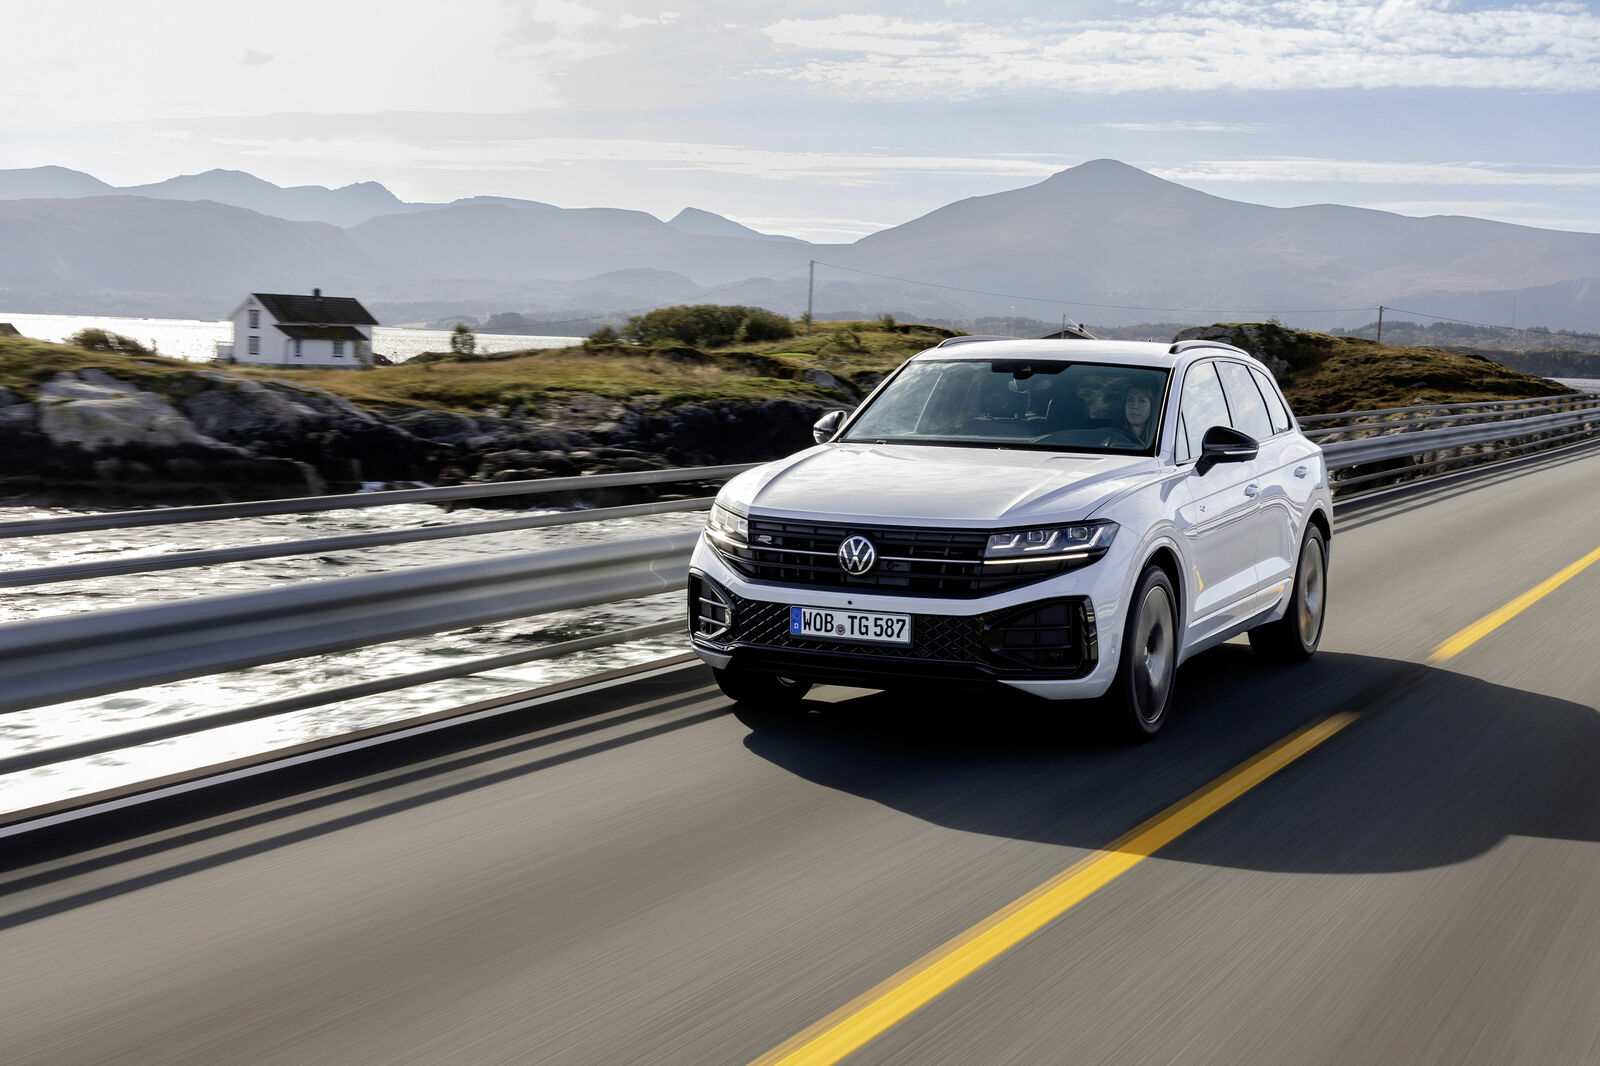 New Volkswagen Touareg R-Line Tech Plus unveiled as range-topping SUV